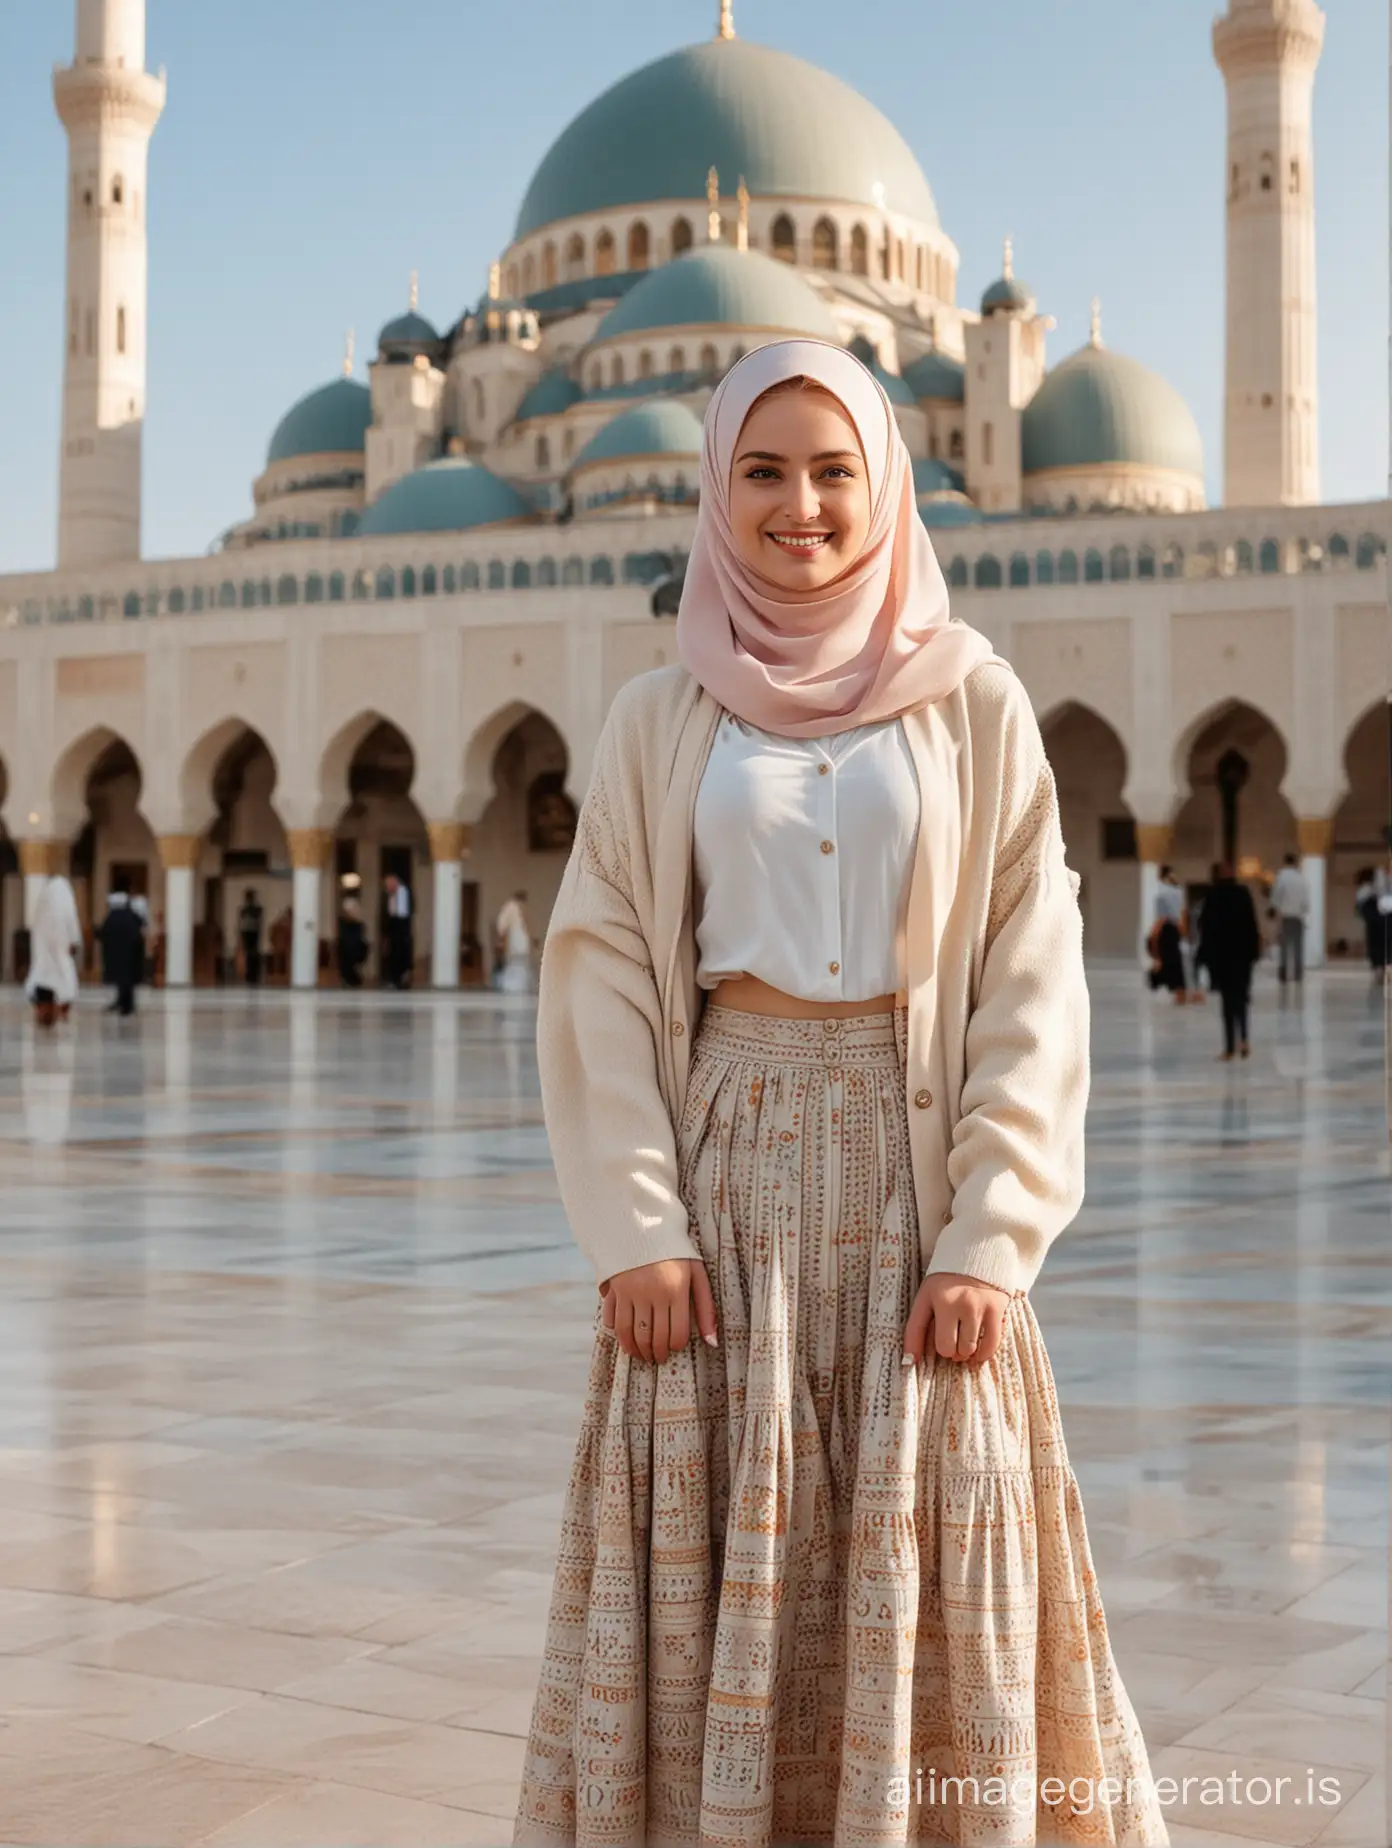 russian girl in hijab, wearing outer cardigan, long skirt, eye level, dynamic pose, smile, background Mecca mosque